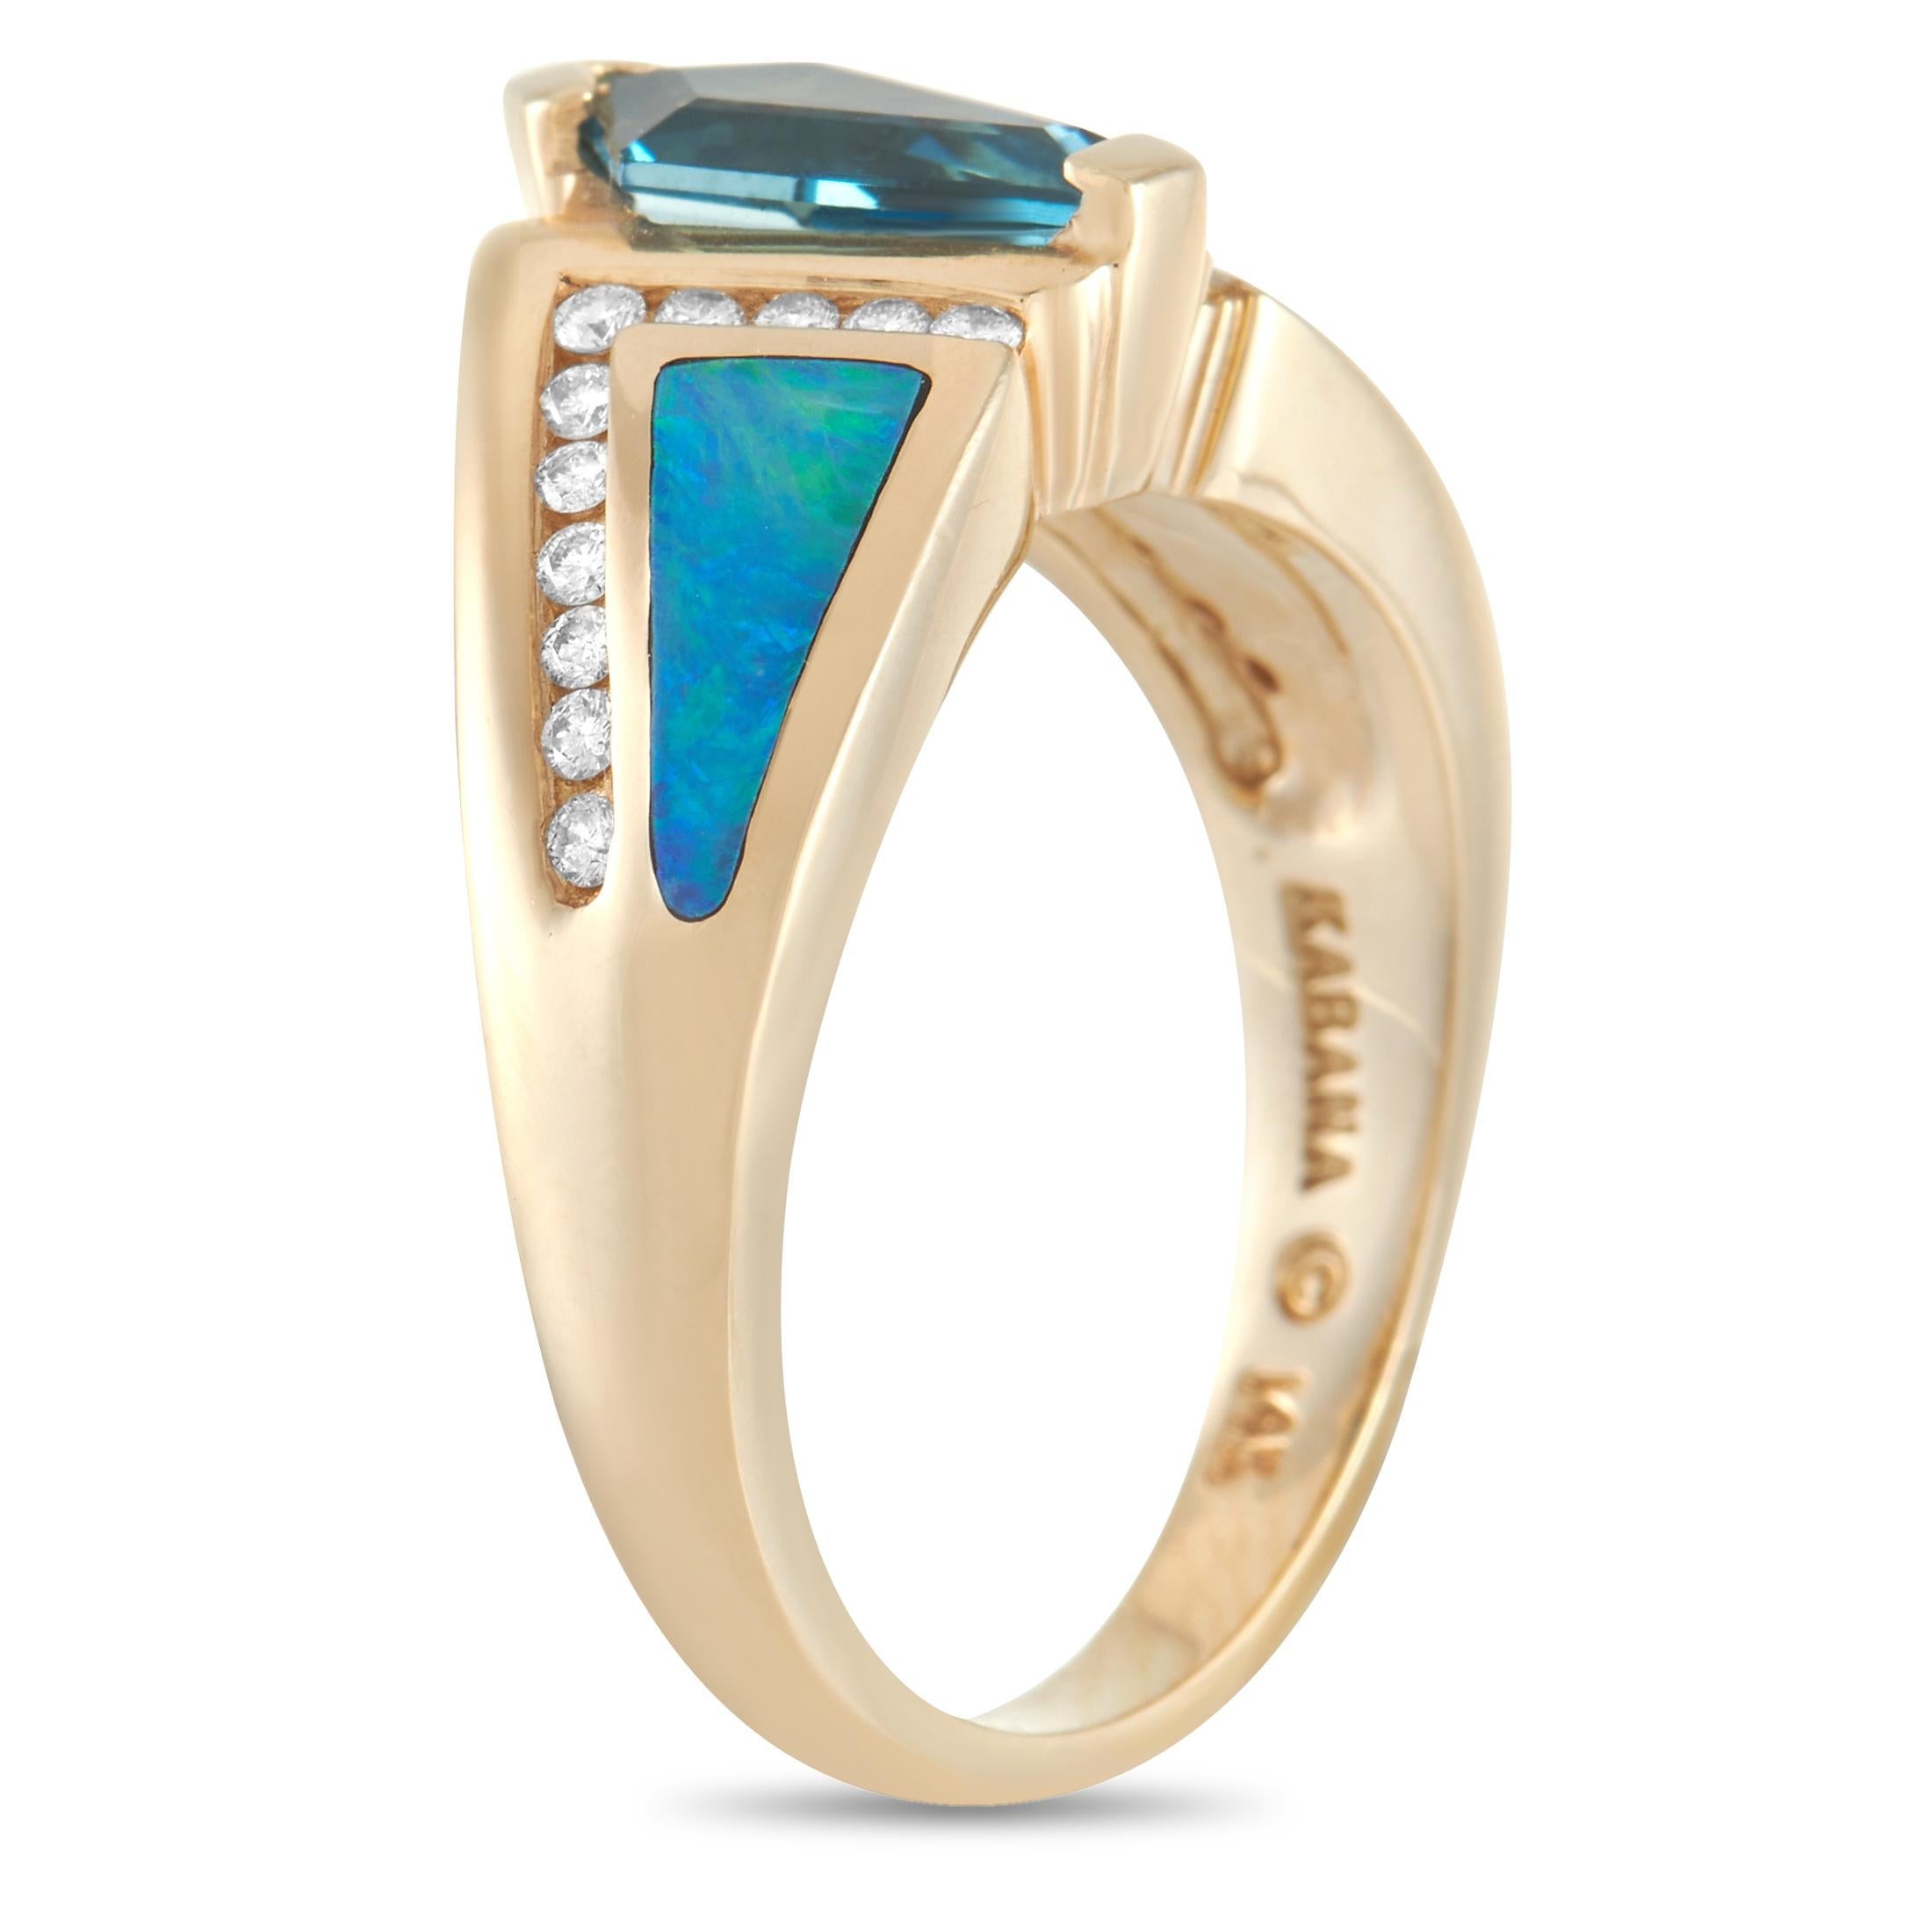 This Kabana ring is perfect for anyone with refined taste who appreciates a luxurious pop of color. At the center of this piece’s creative 14K Yellow Gold setting, you’ll find a shimmering blue 0.90 carat topaz. It’s also flanked by glittering